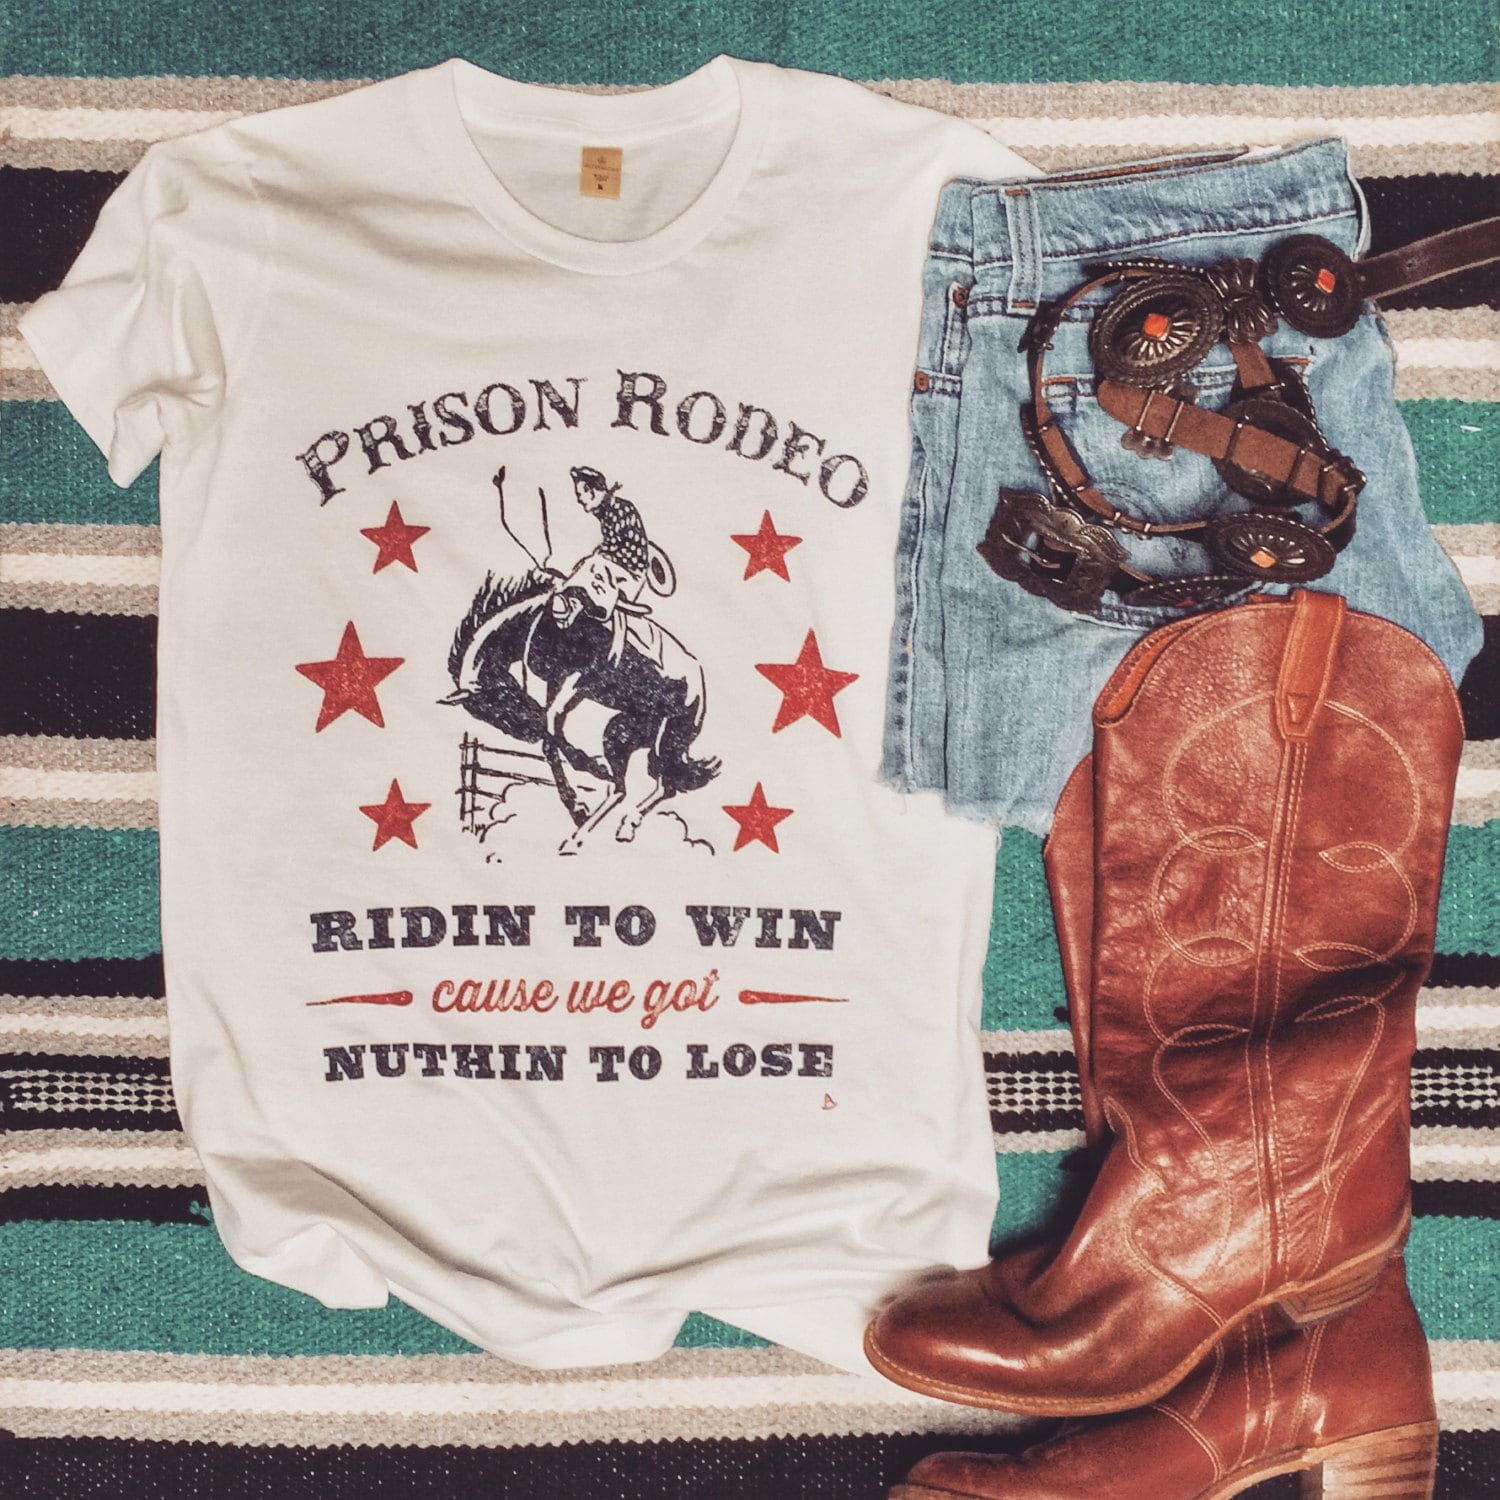 prison rodeo graphic tee ridin to win cause we got nuthin to